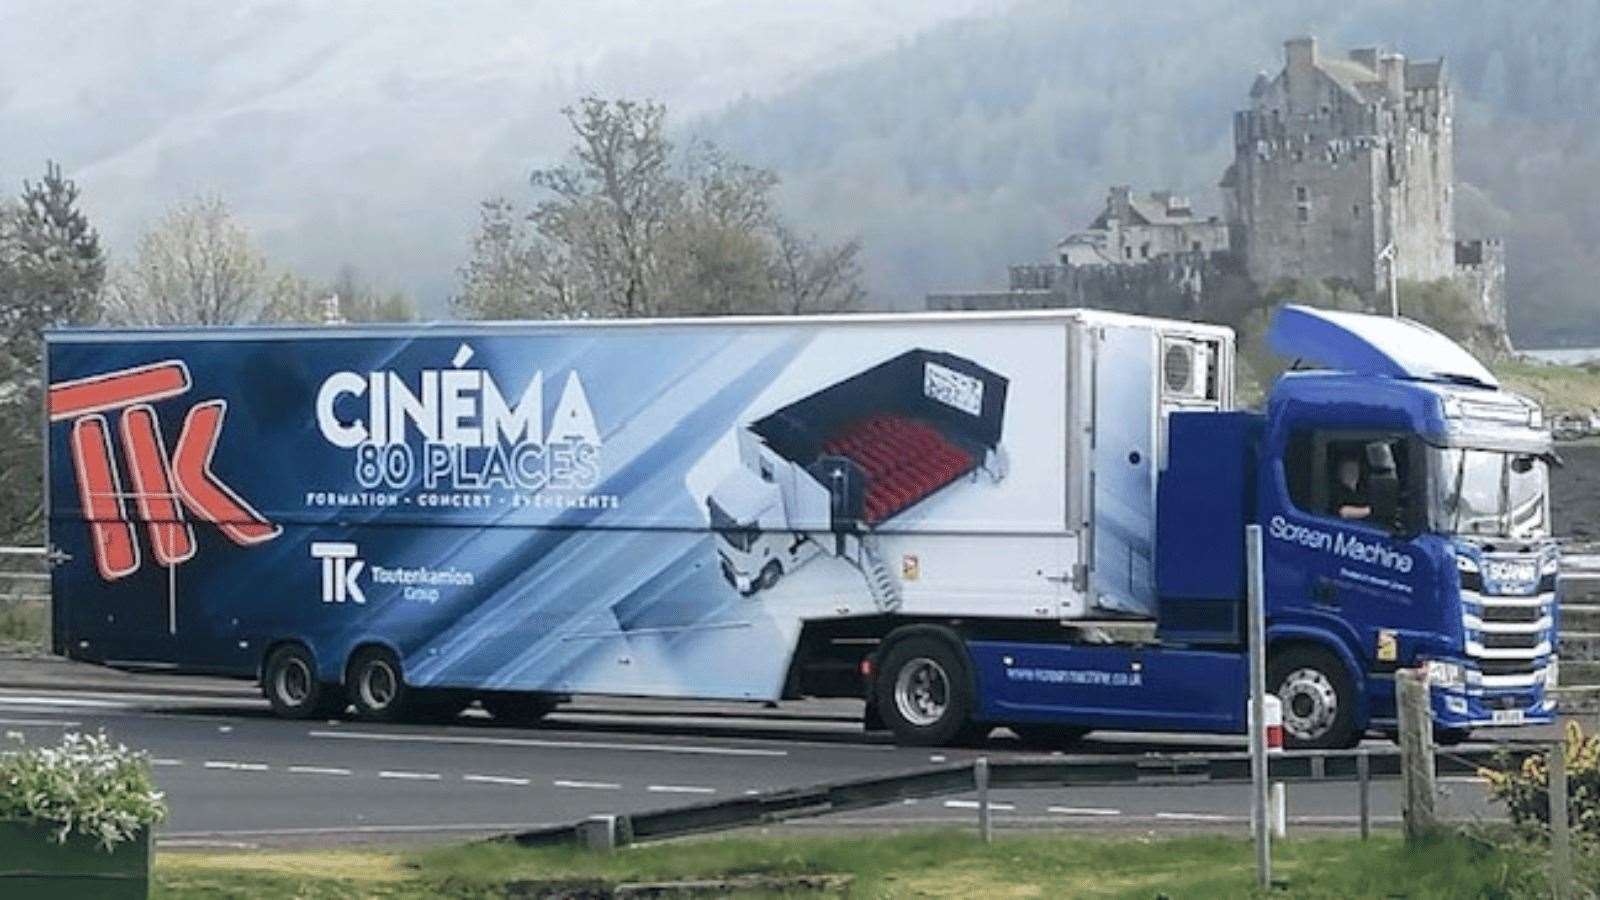 Cinémobile has 80 comfortable seats and is almost identical to the Screen Machine,